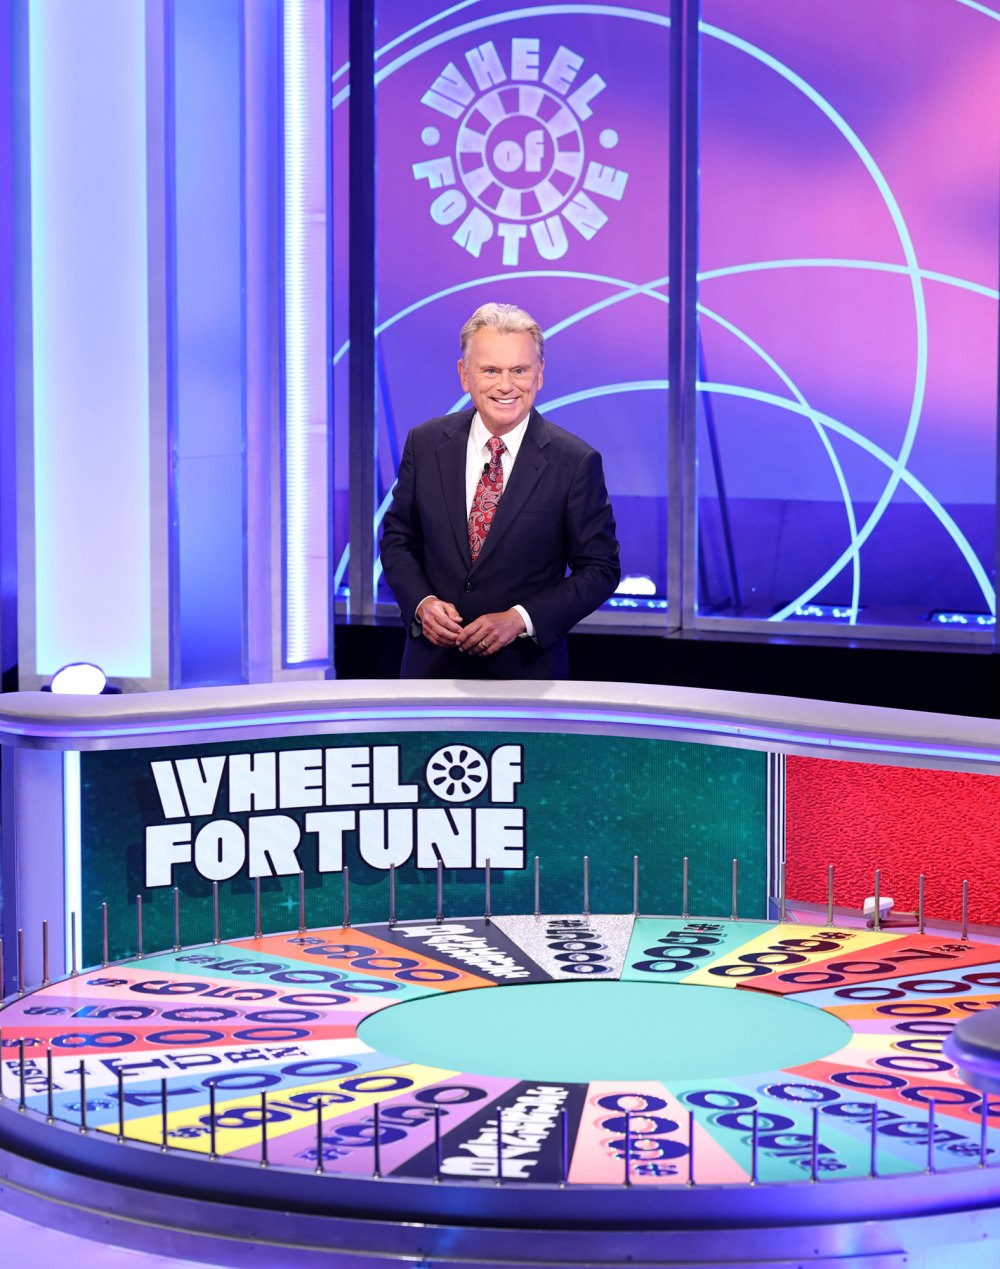 Pat Sajak’s Final ‘Wheel of Fortune’ Show Date Revealed Ahead of Retirement